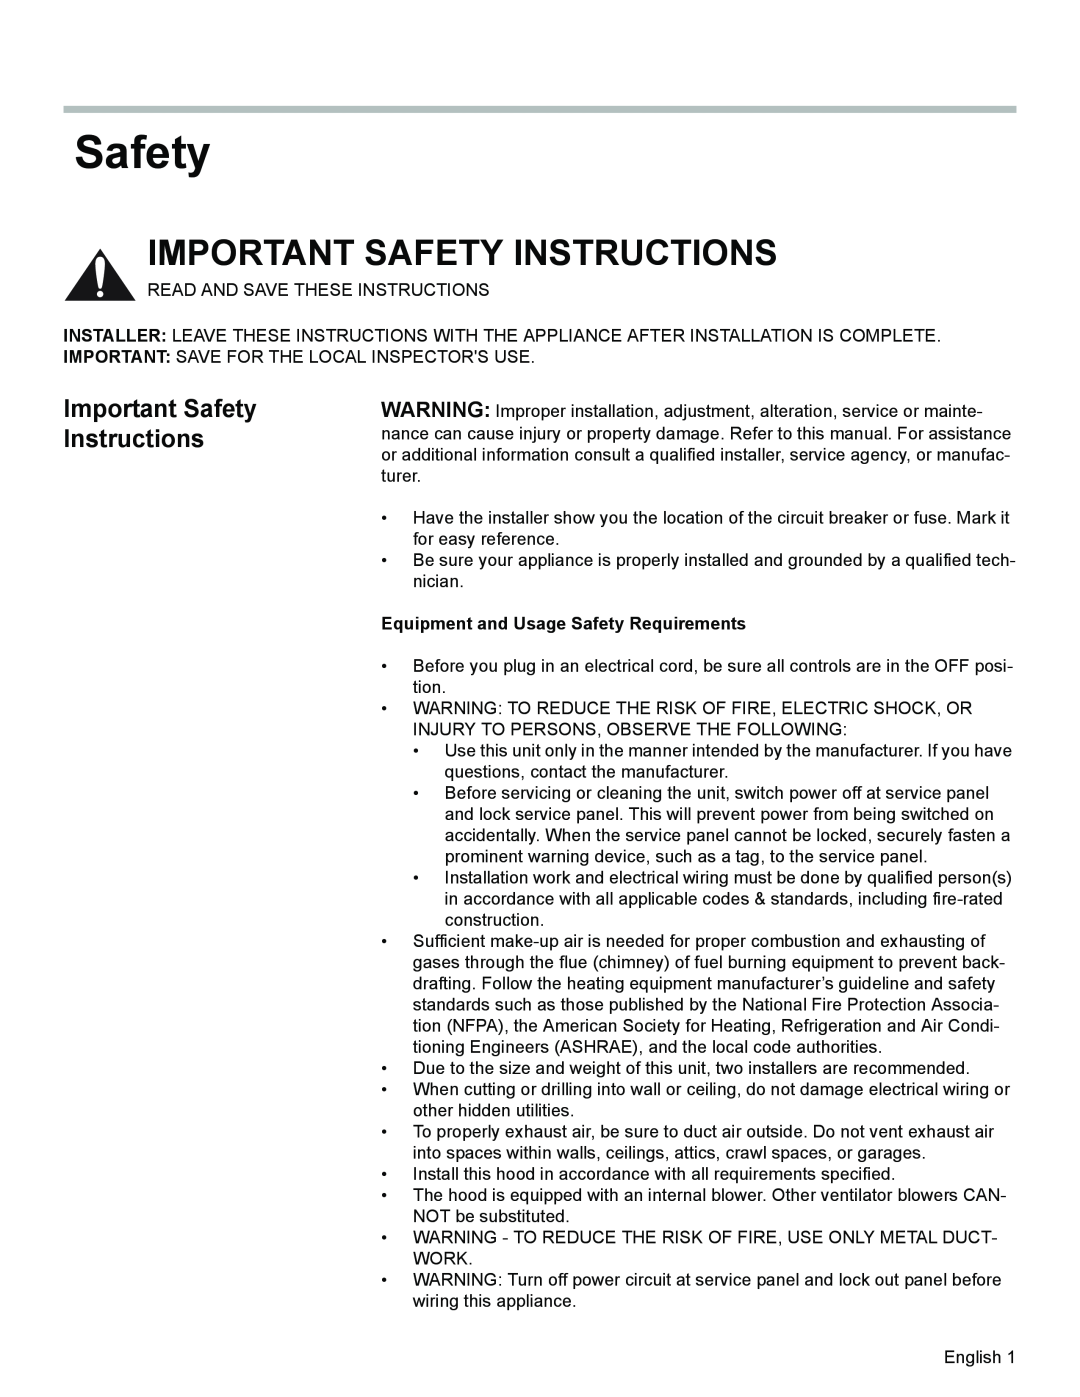 Bosch Appliances DKE94 installation manual Important Safety Instructions, Equipment and Usage Safety Requirements 